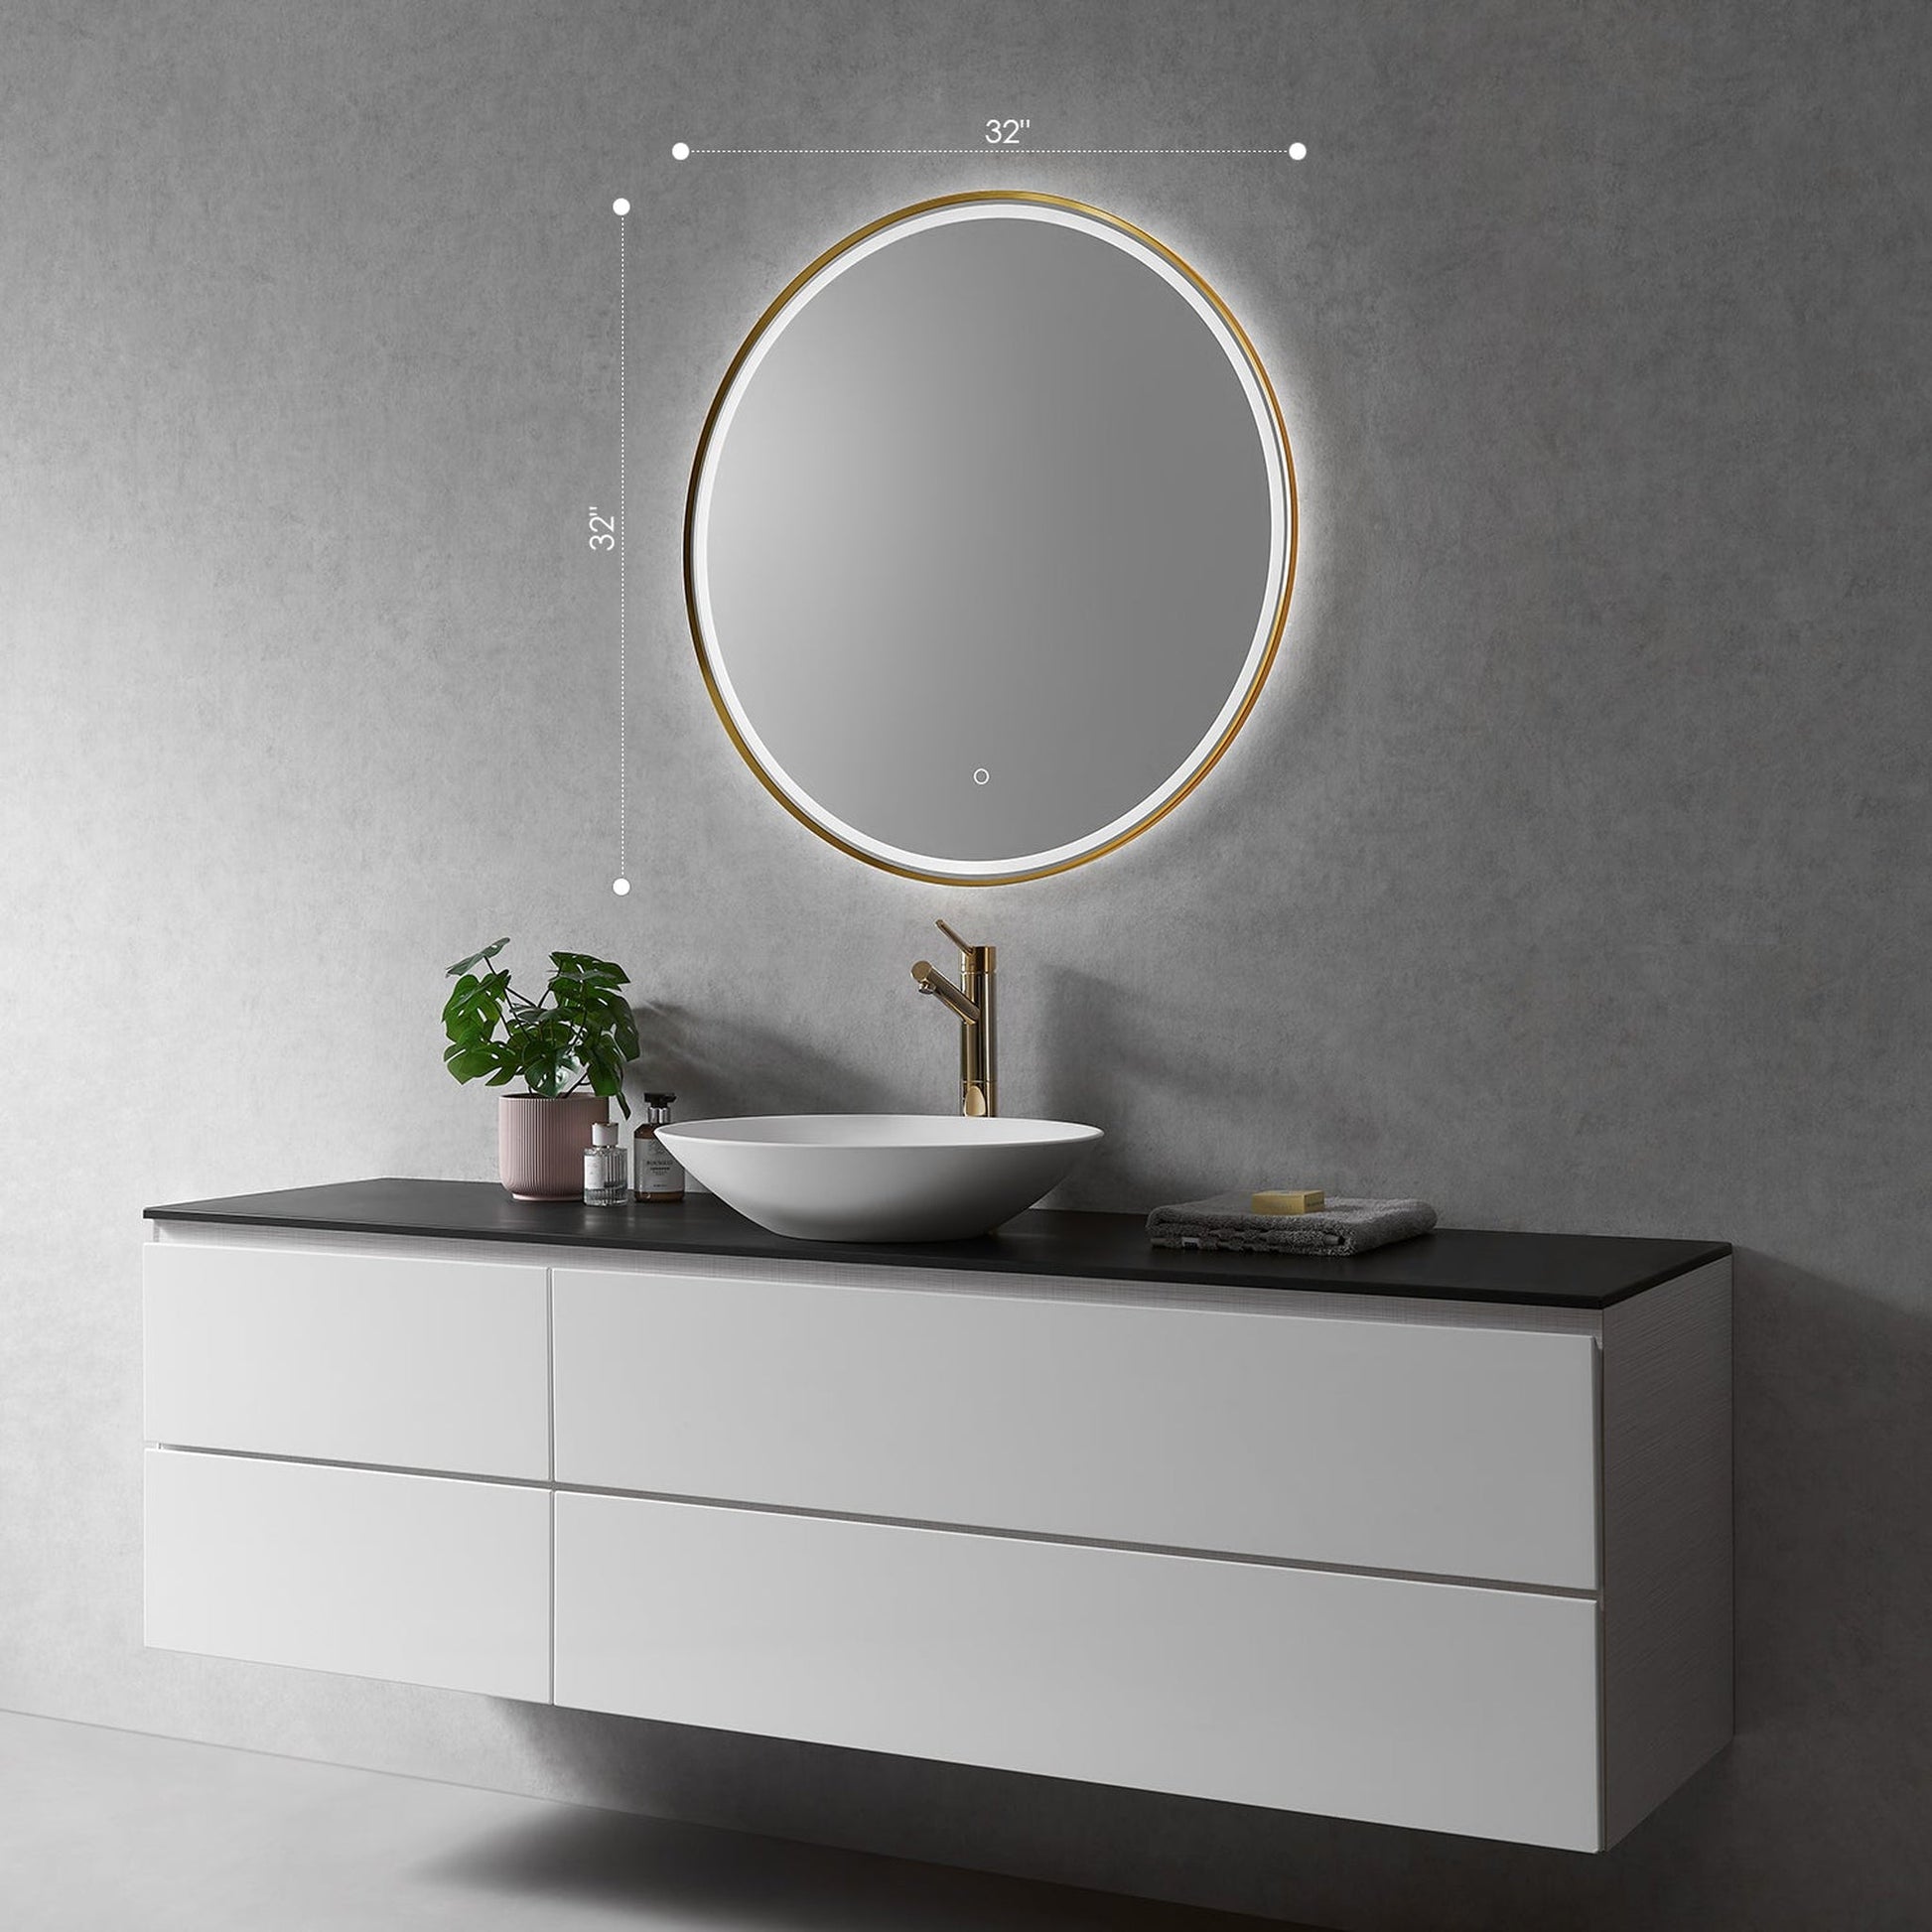 Altair Palme 32" Round Brushed Gold Wall-Mounted LED Mirror